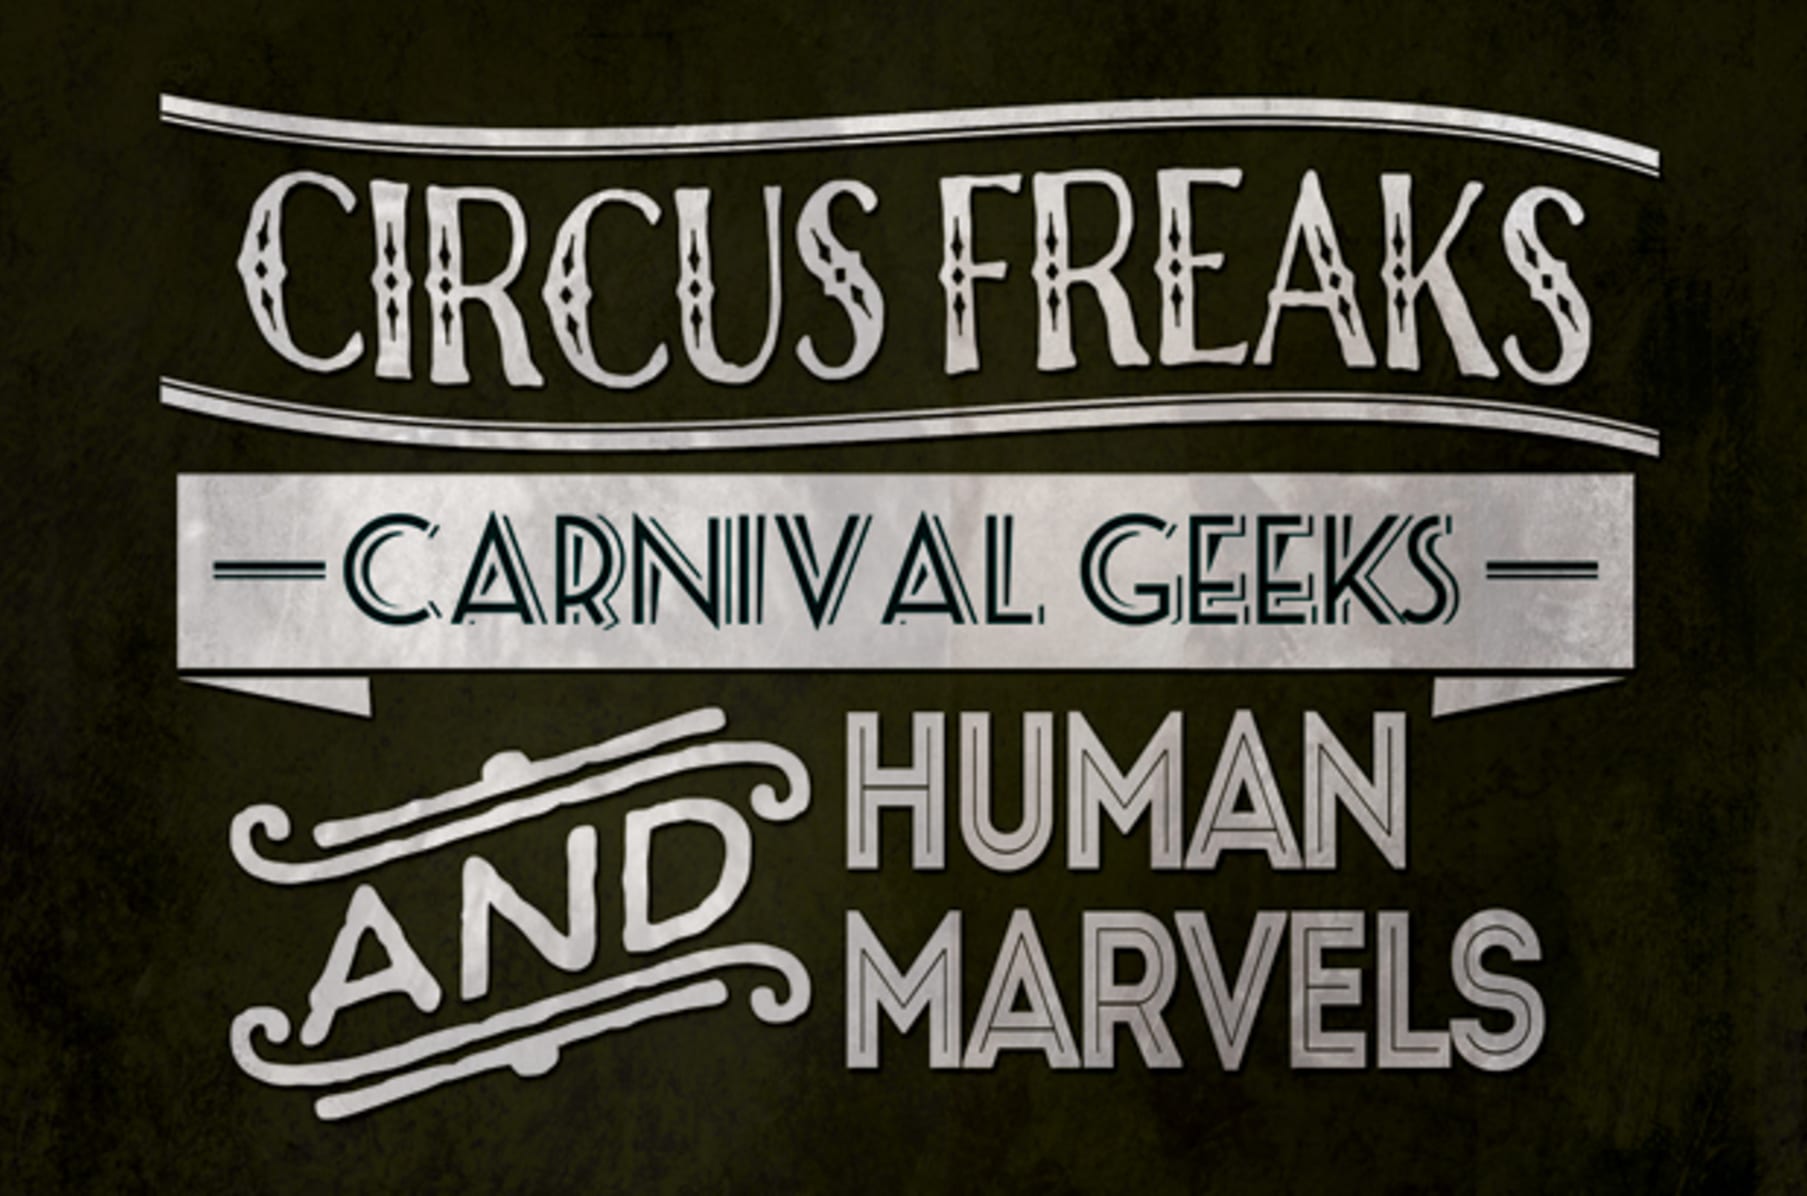 Circus Freaks Carnival Geeks And Human Marvels Indiegogo